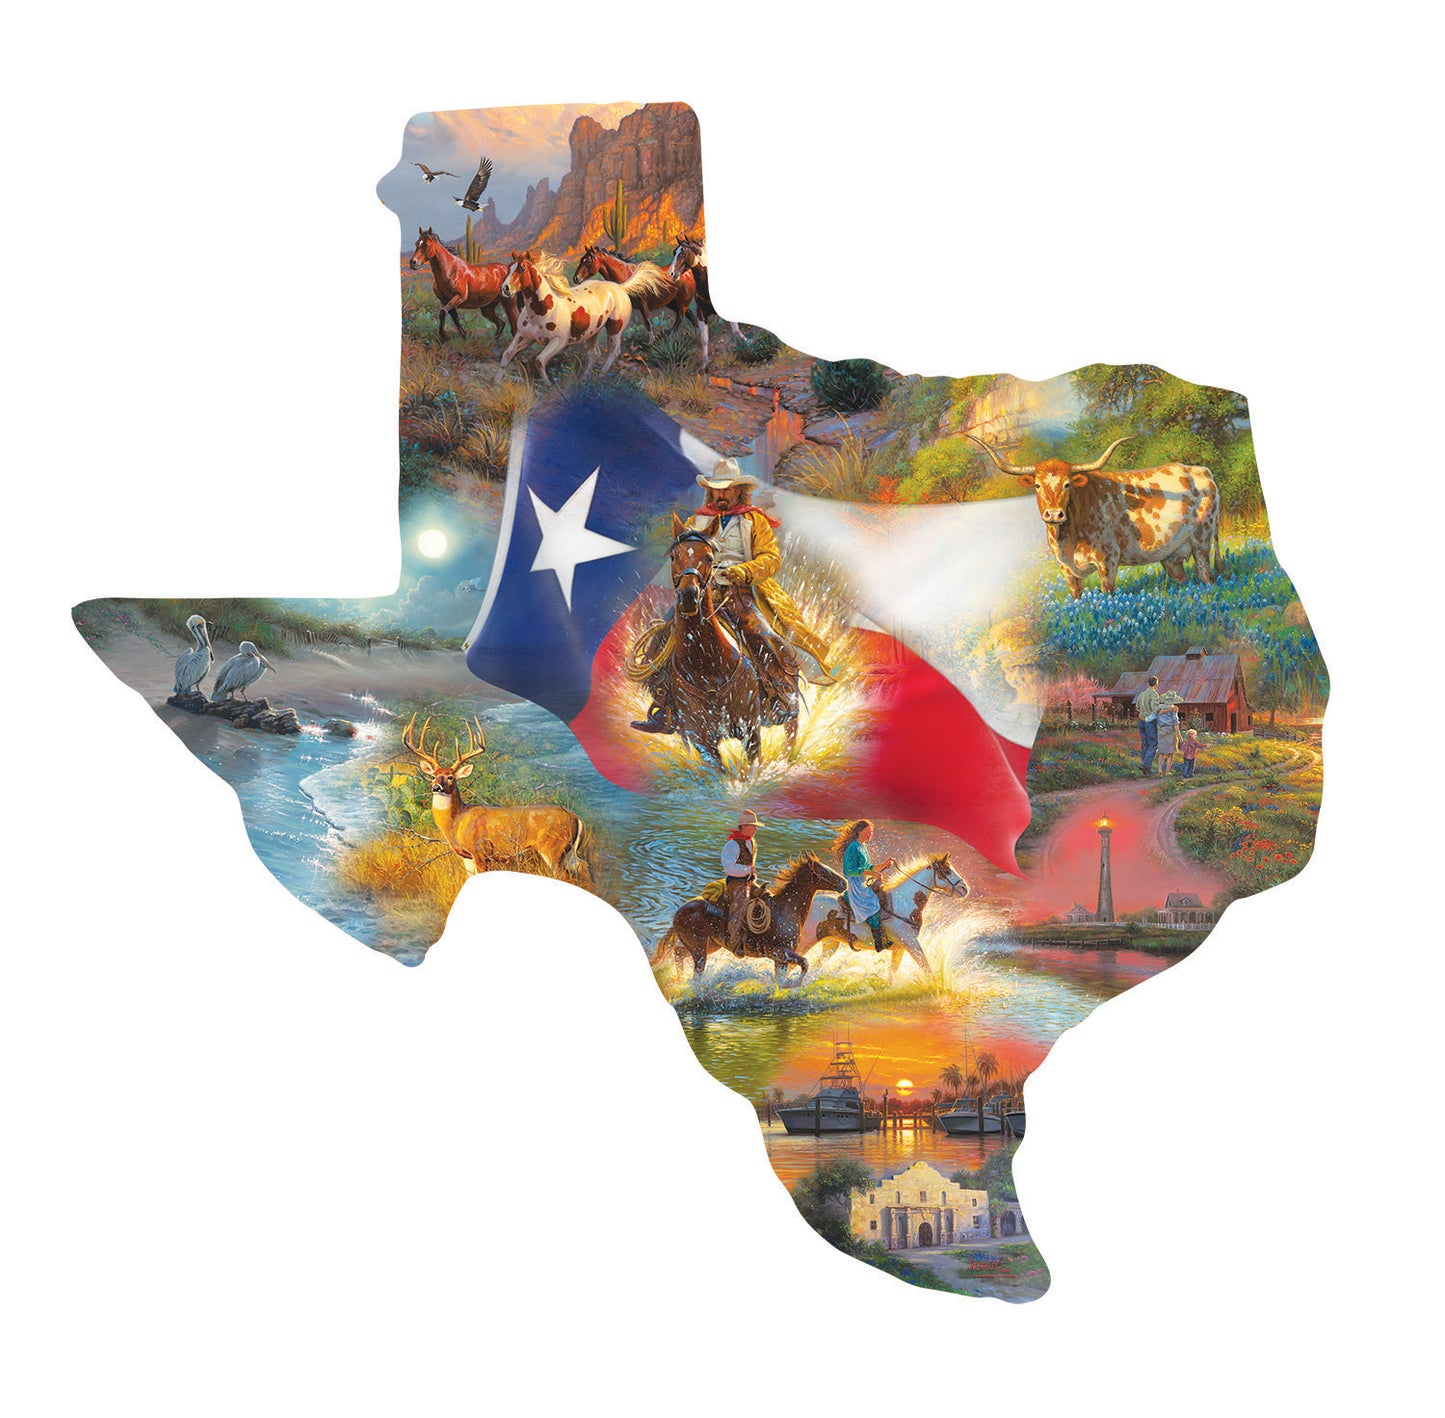 Images of Texas - Shaped 1000 Piece Jigsaw Puzzle